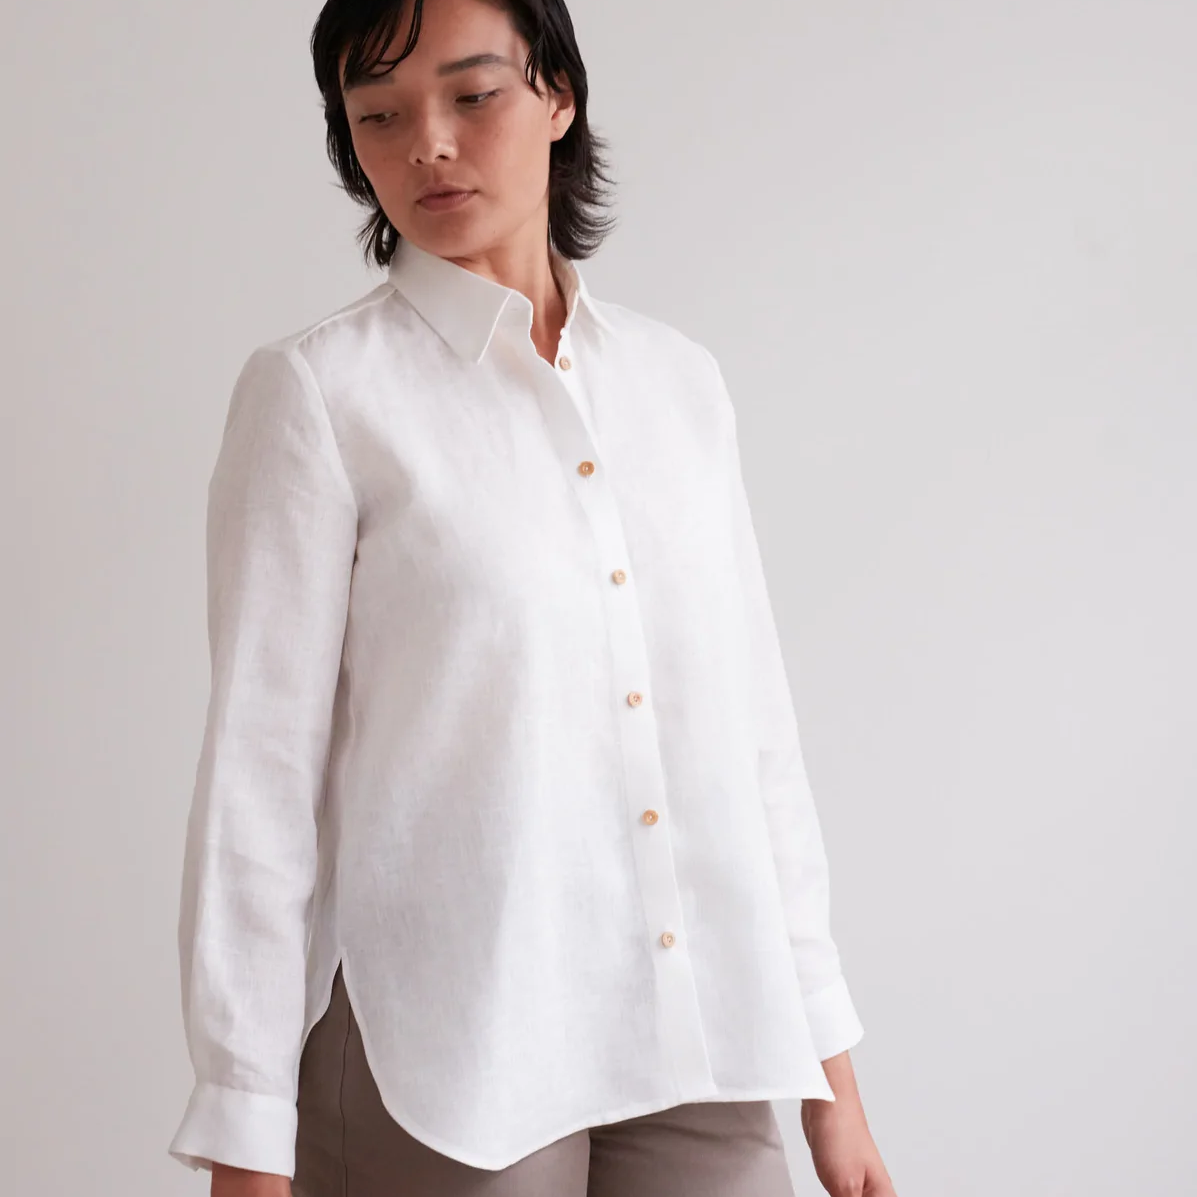 The Modern Sewing Co PDF Classic Shirt Sewing Pattern | Good Fabric